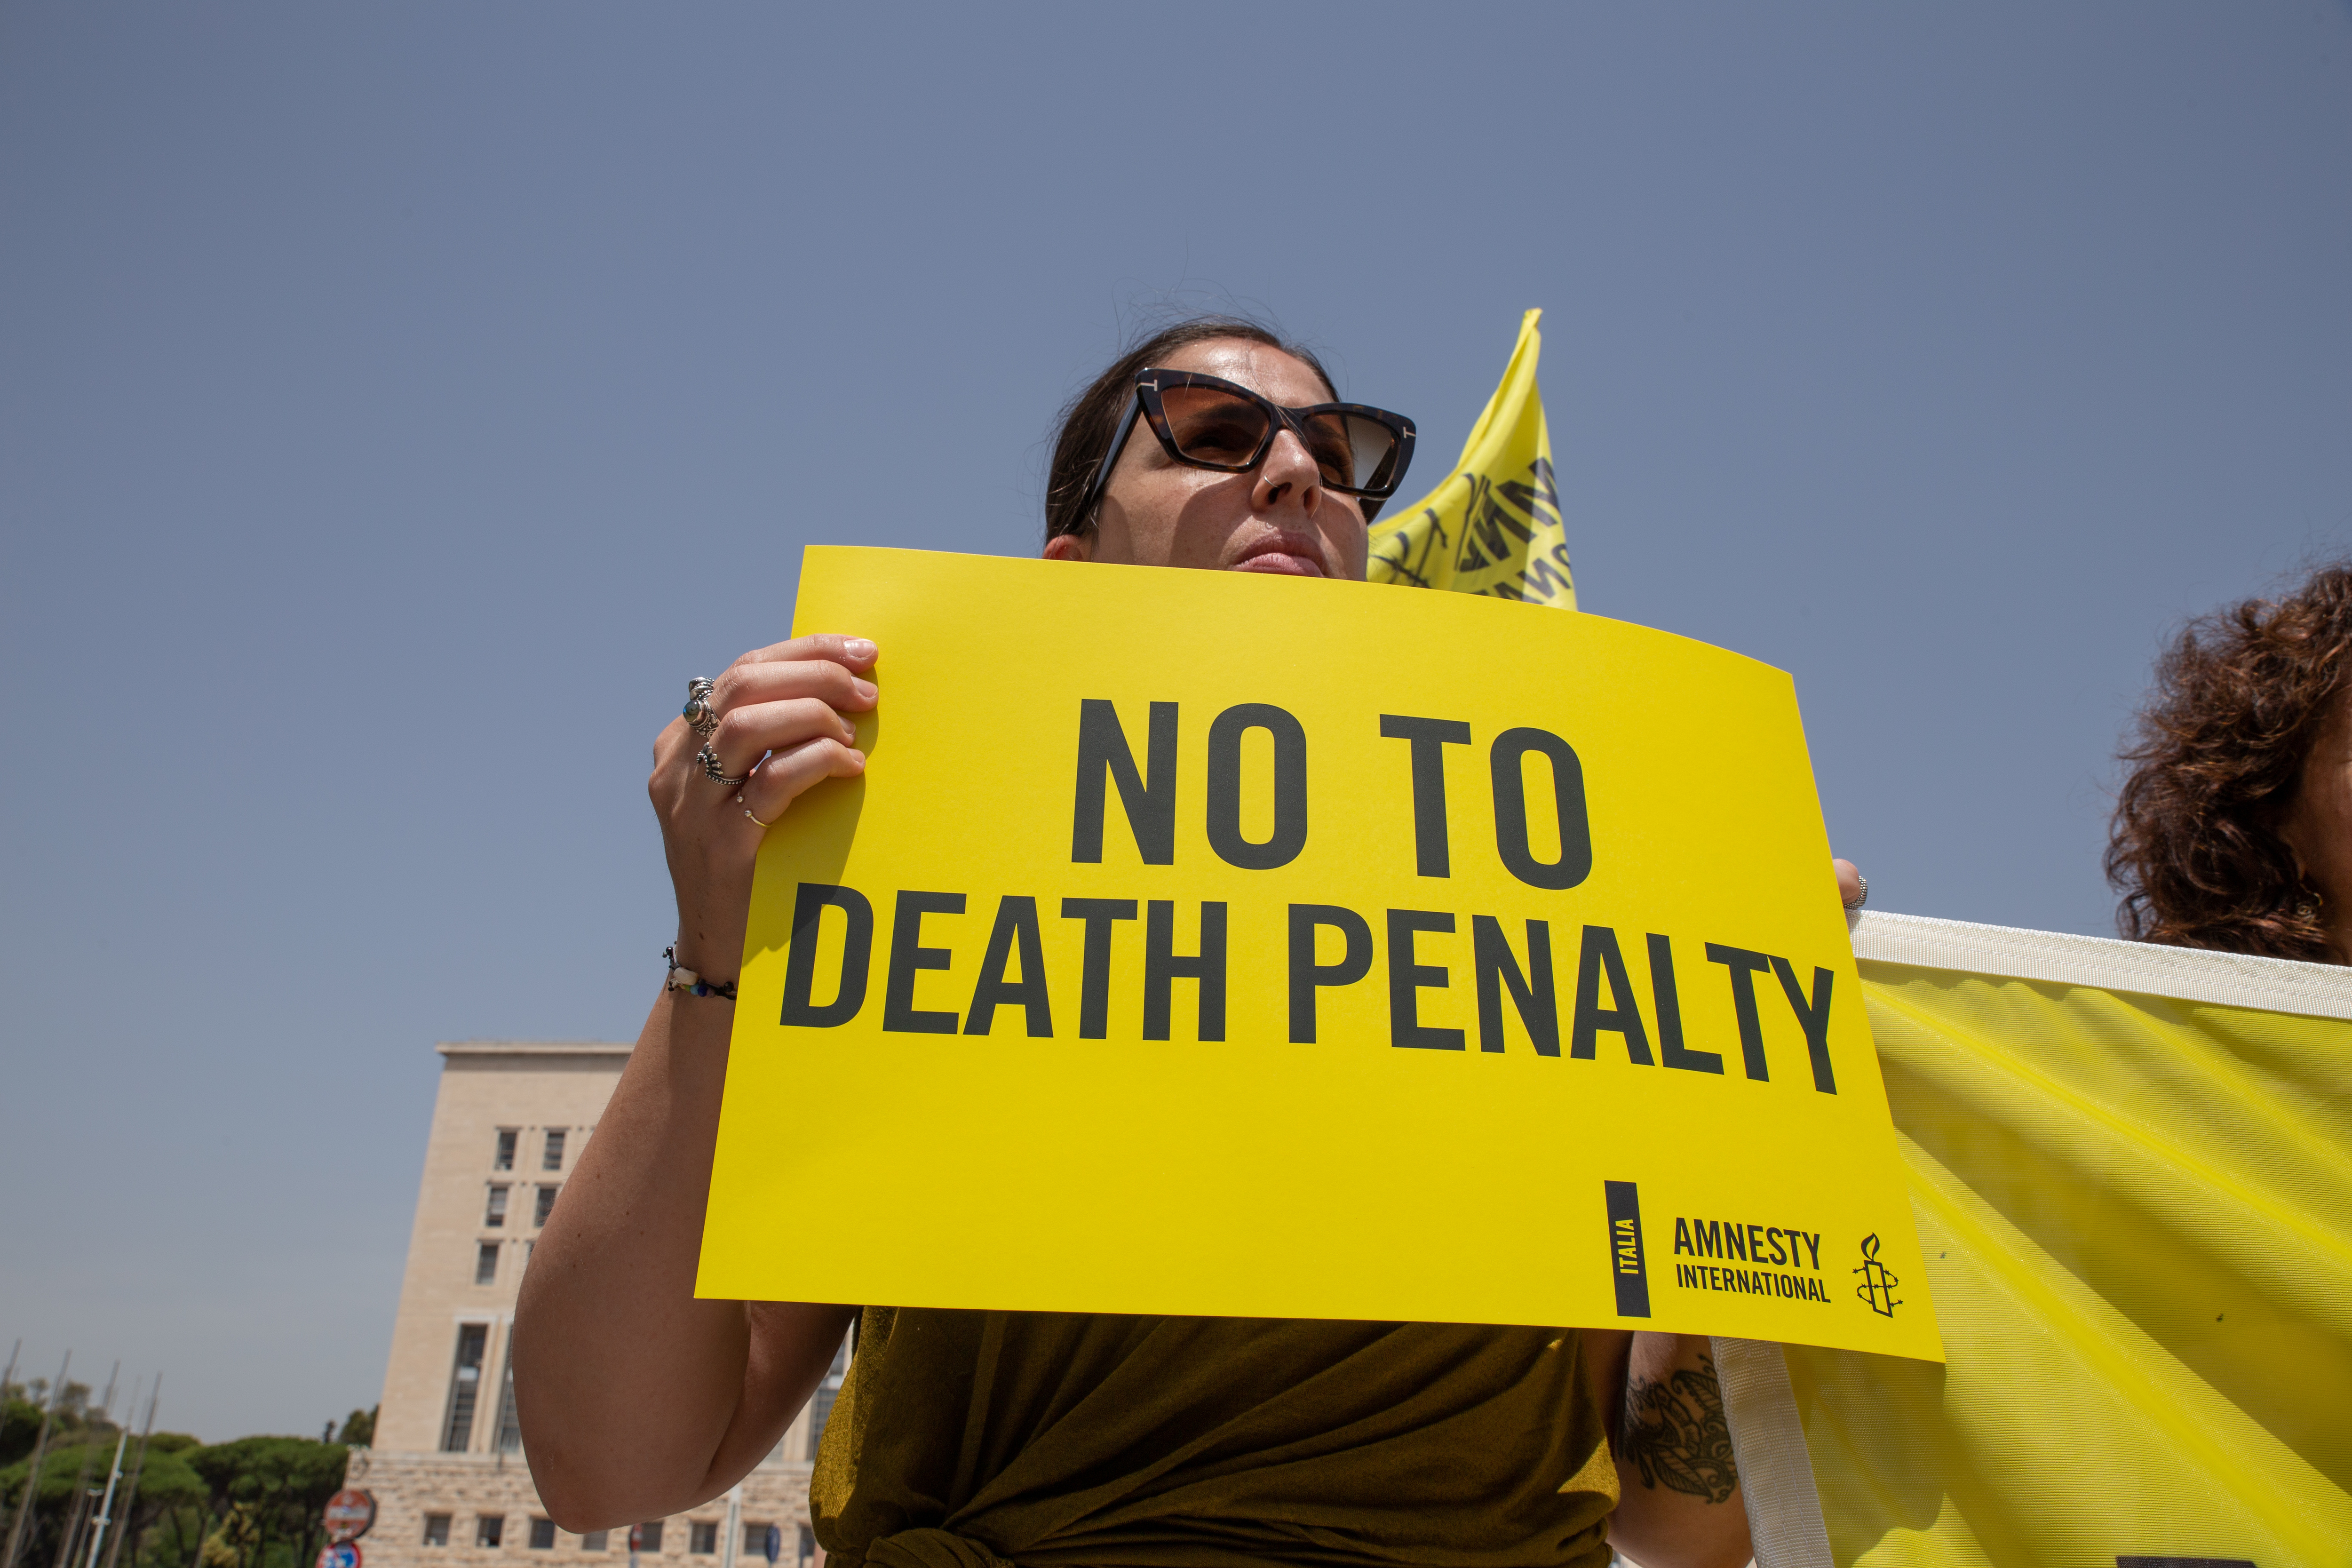 An Amnesty International activist protests against executions in Myanmar